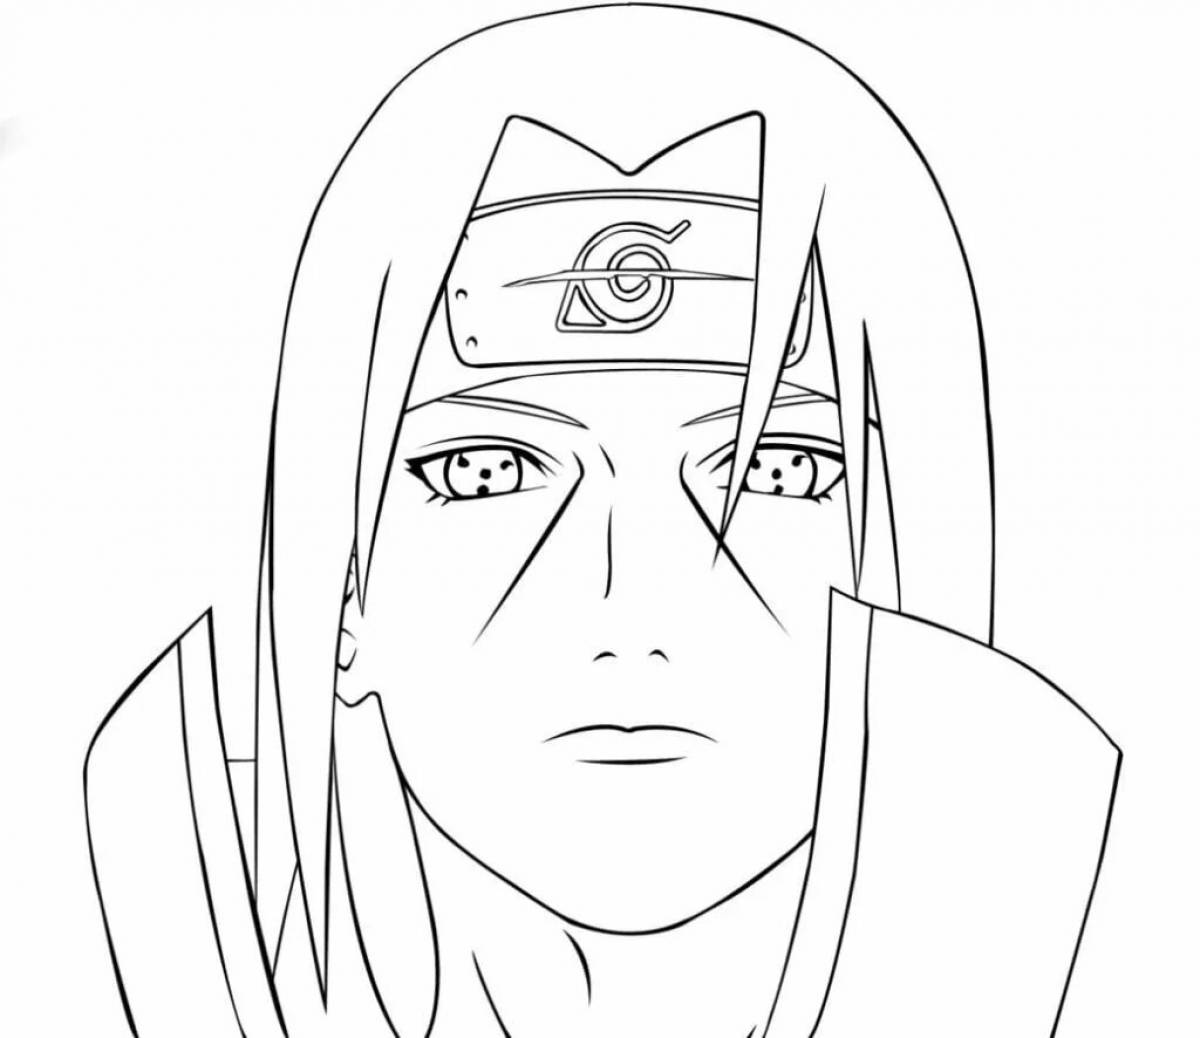 Amazingly detailed itachi naruto coloring page